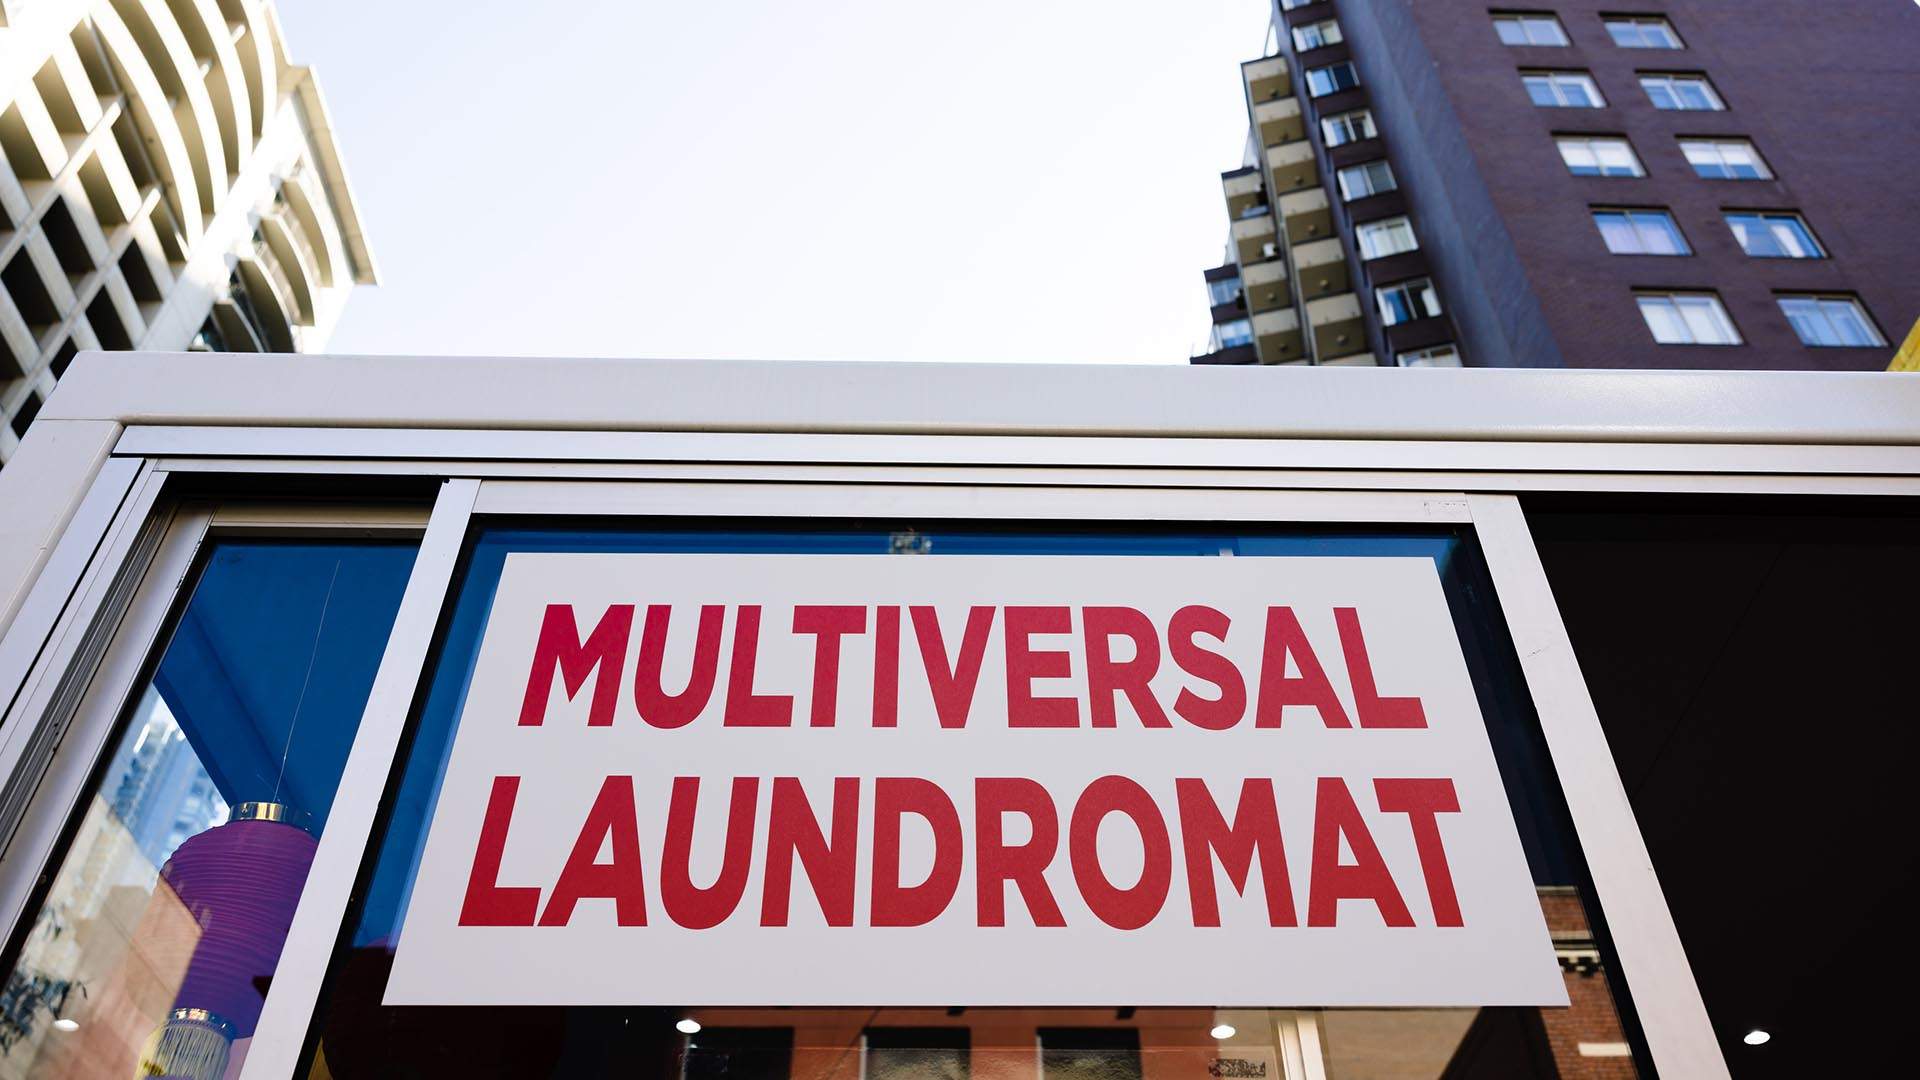 An 'Everything Everywhere All At Once'-Style Multidimensional Laundromat Has Popped Up in Melbourne